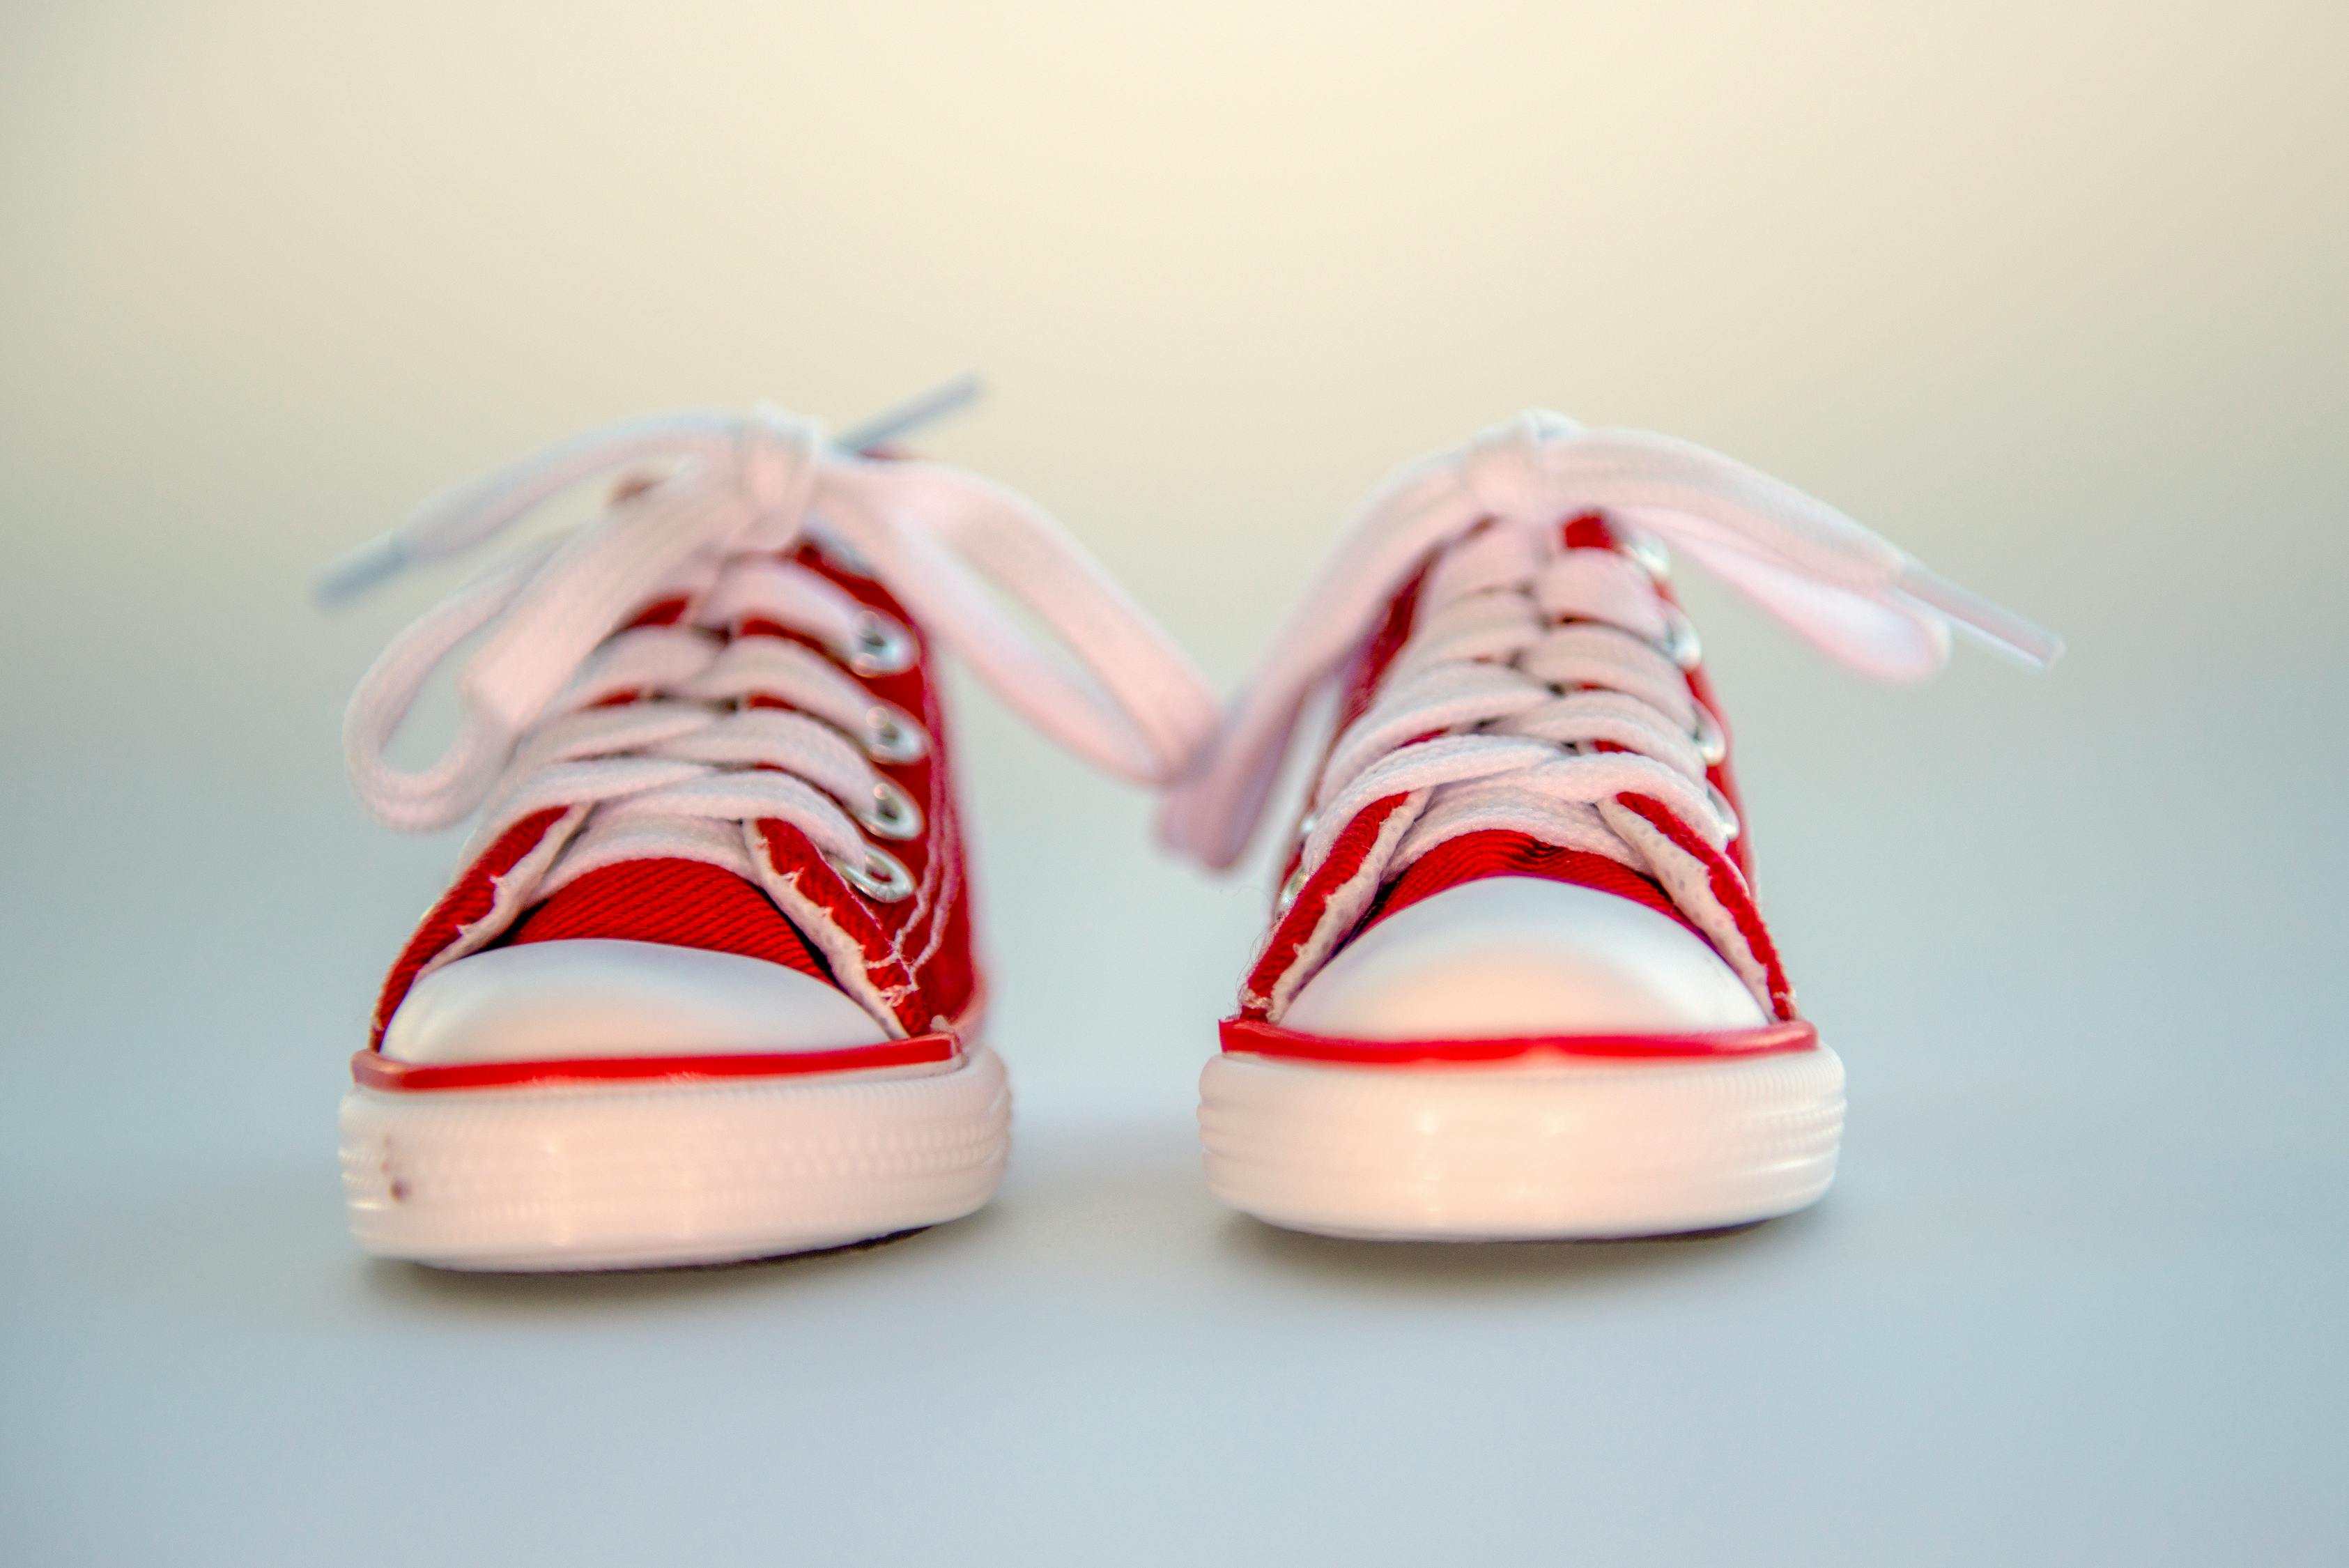 Close-up Photo of Pair of Red Low-top Baby Sneakers · Free Stock Photo